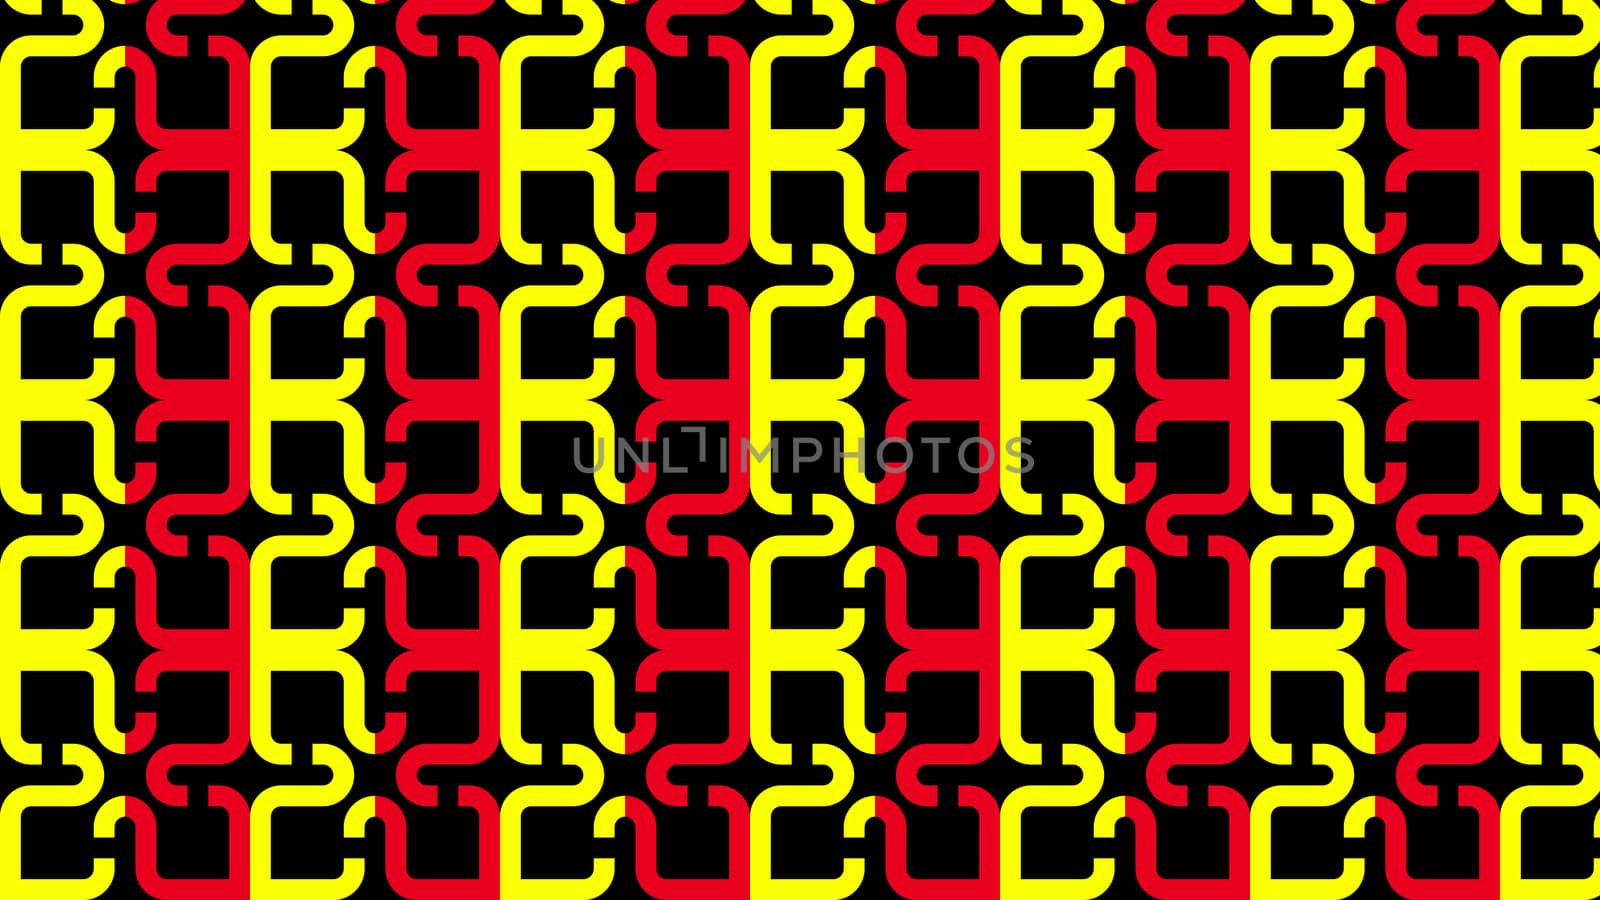 Abstract geometric background: Abstract of colorful geometric shapes pattern by Photochowk